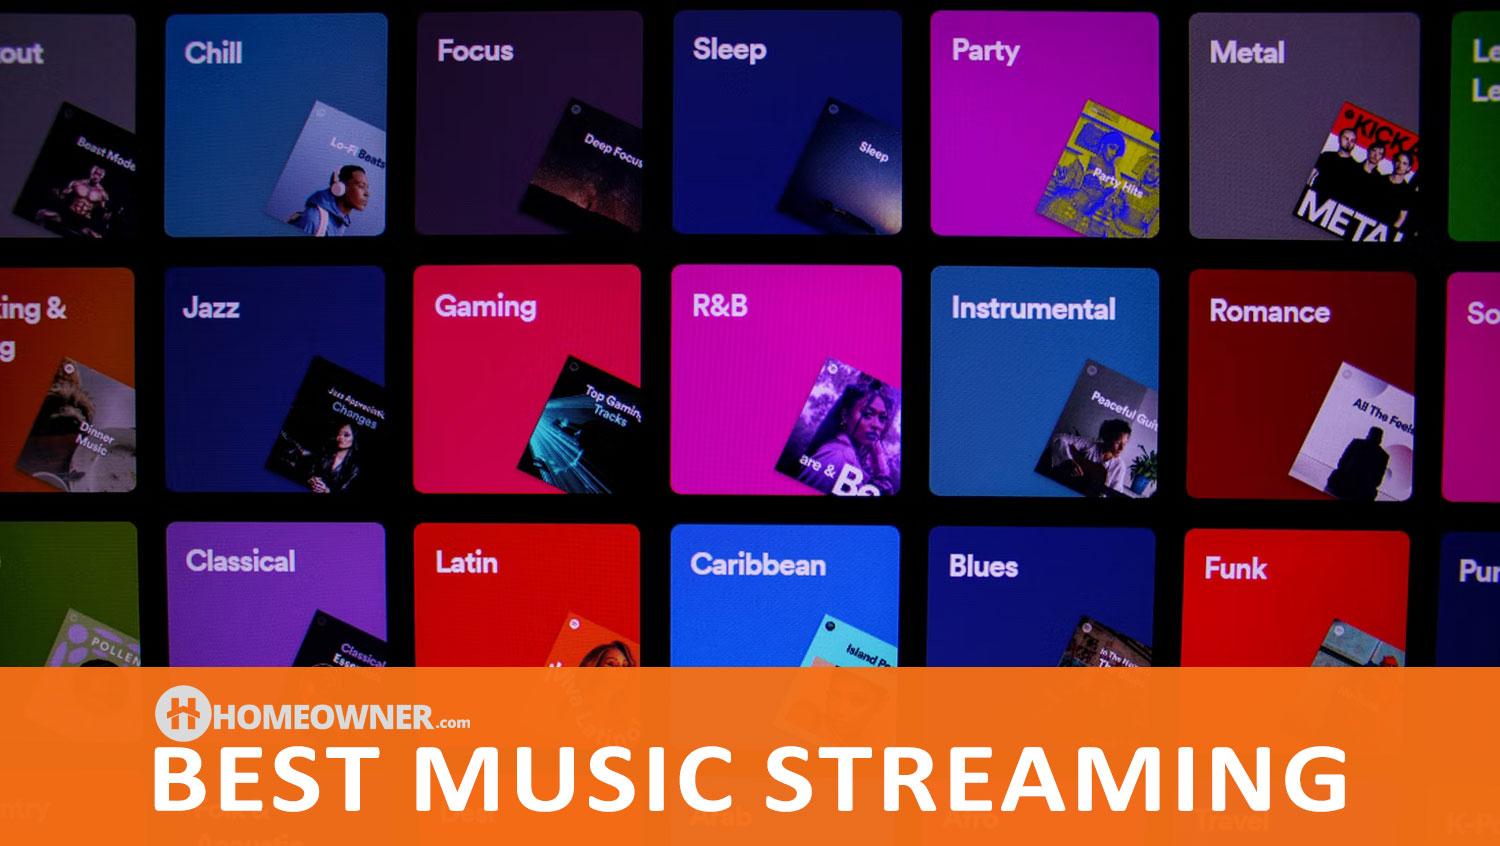 What Is the Best Music Streaming Service in 2022?